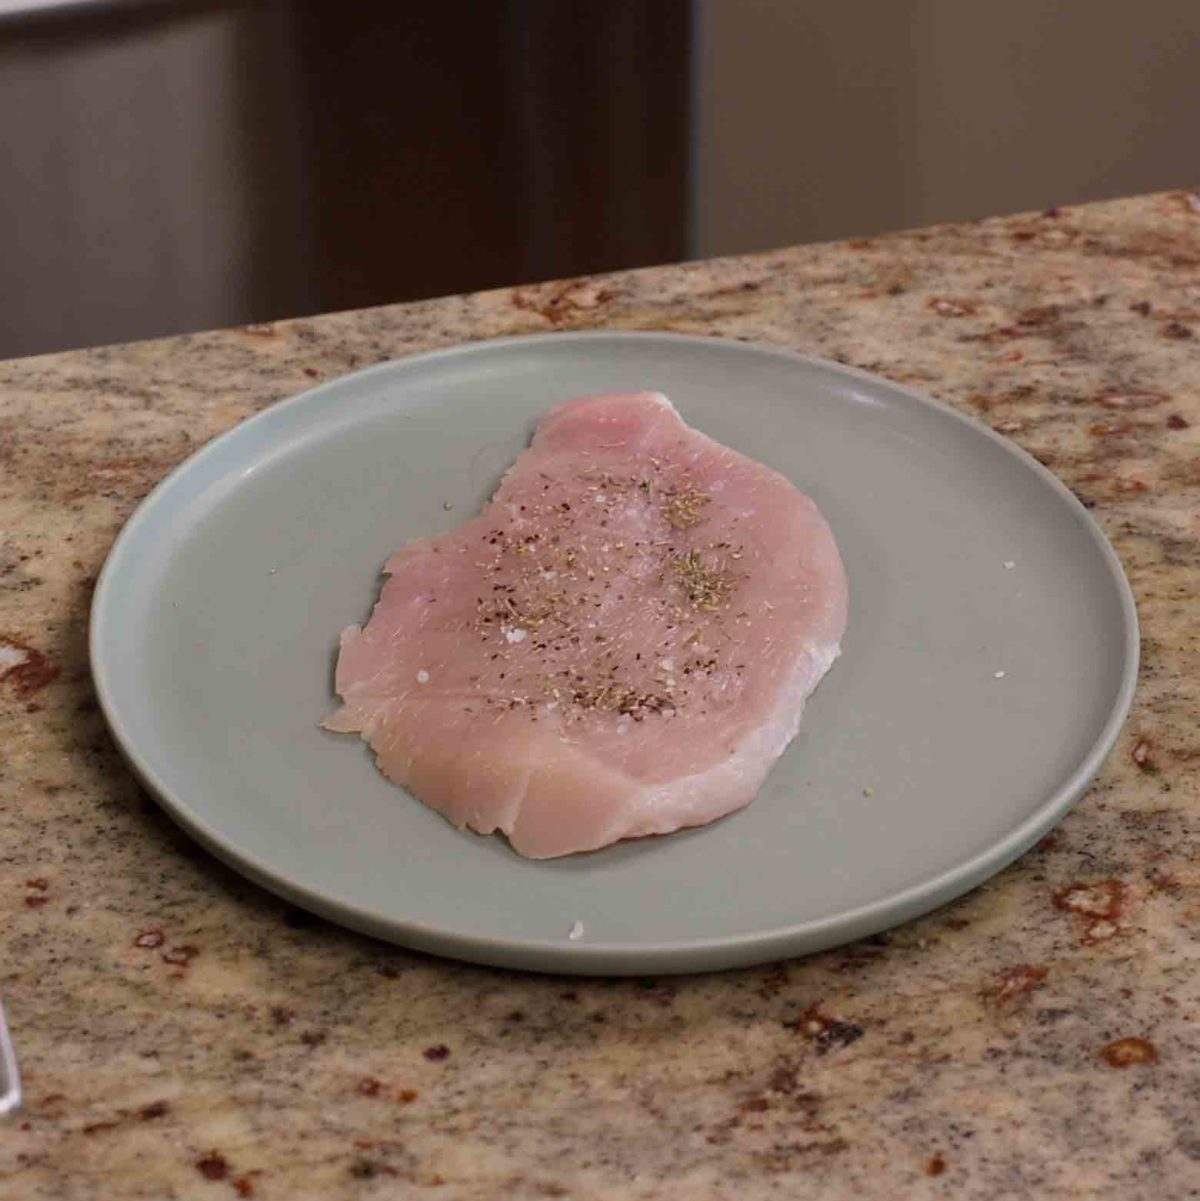 Easy Turkey Cutlets in White Wine Sauce - Cookin Canuck